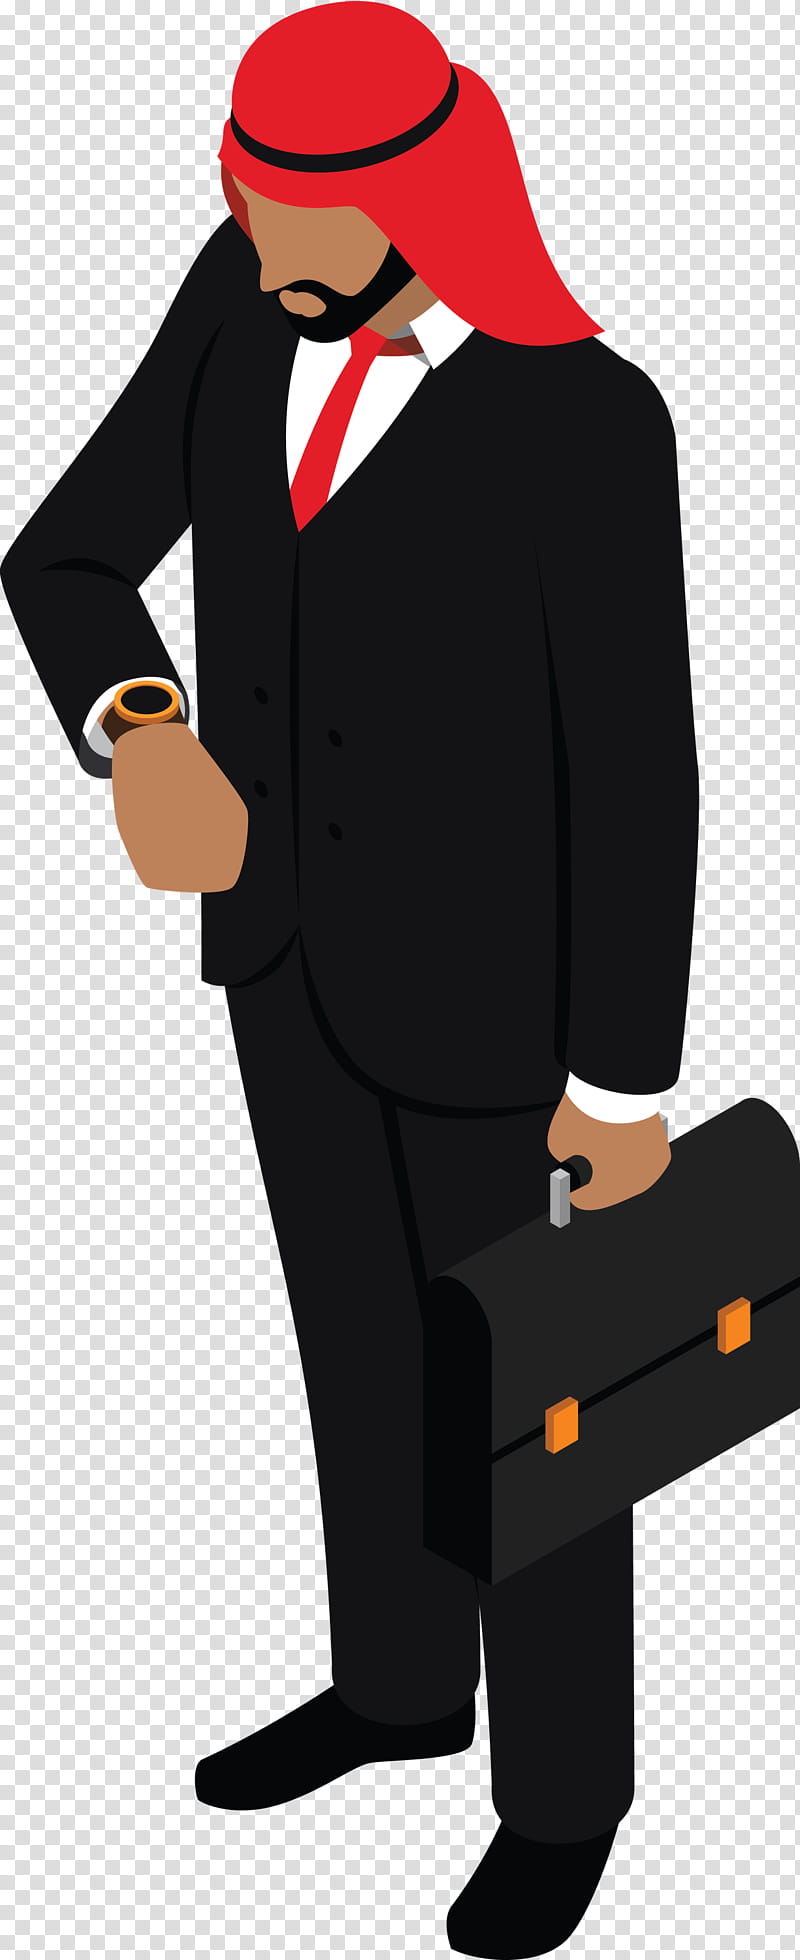 Arabic culture, Cartoon, Character, Gentleman, Tuxedo M, Character Created By transparent background PNG clipart